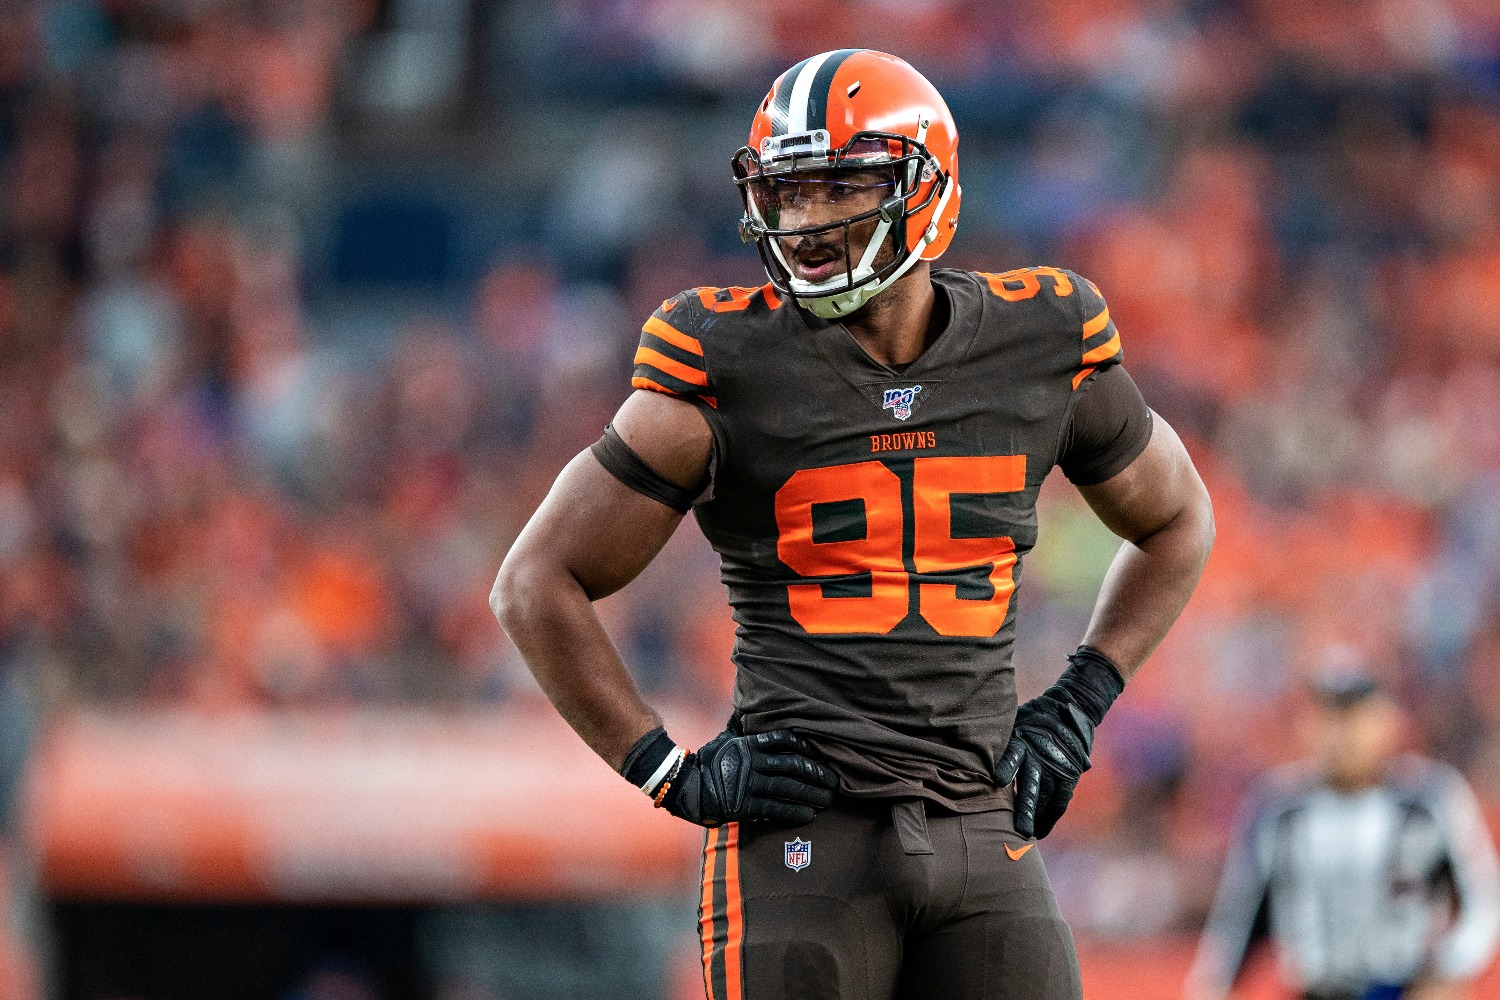 Cleveland Browns defensive end Myles Garrett will sign a record-breaking contract.